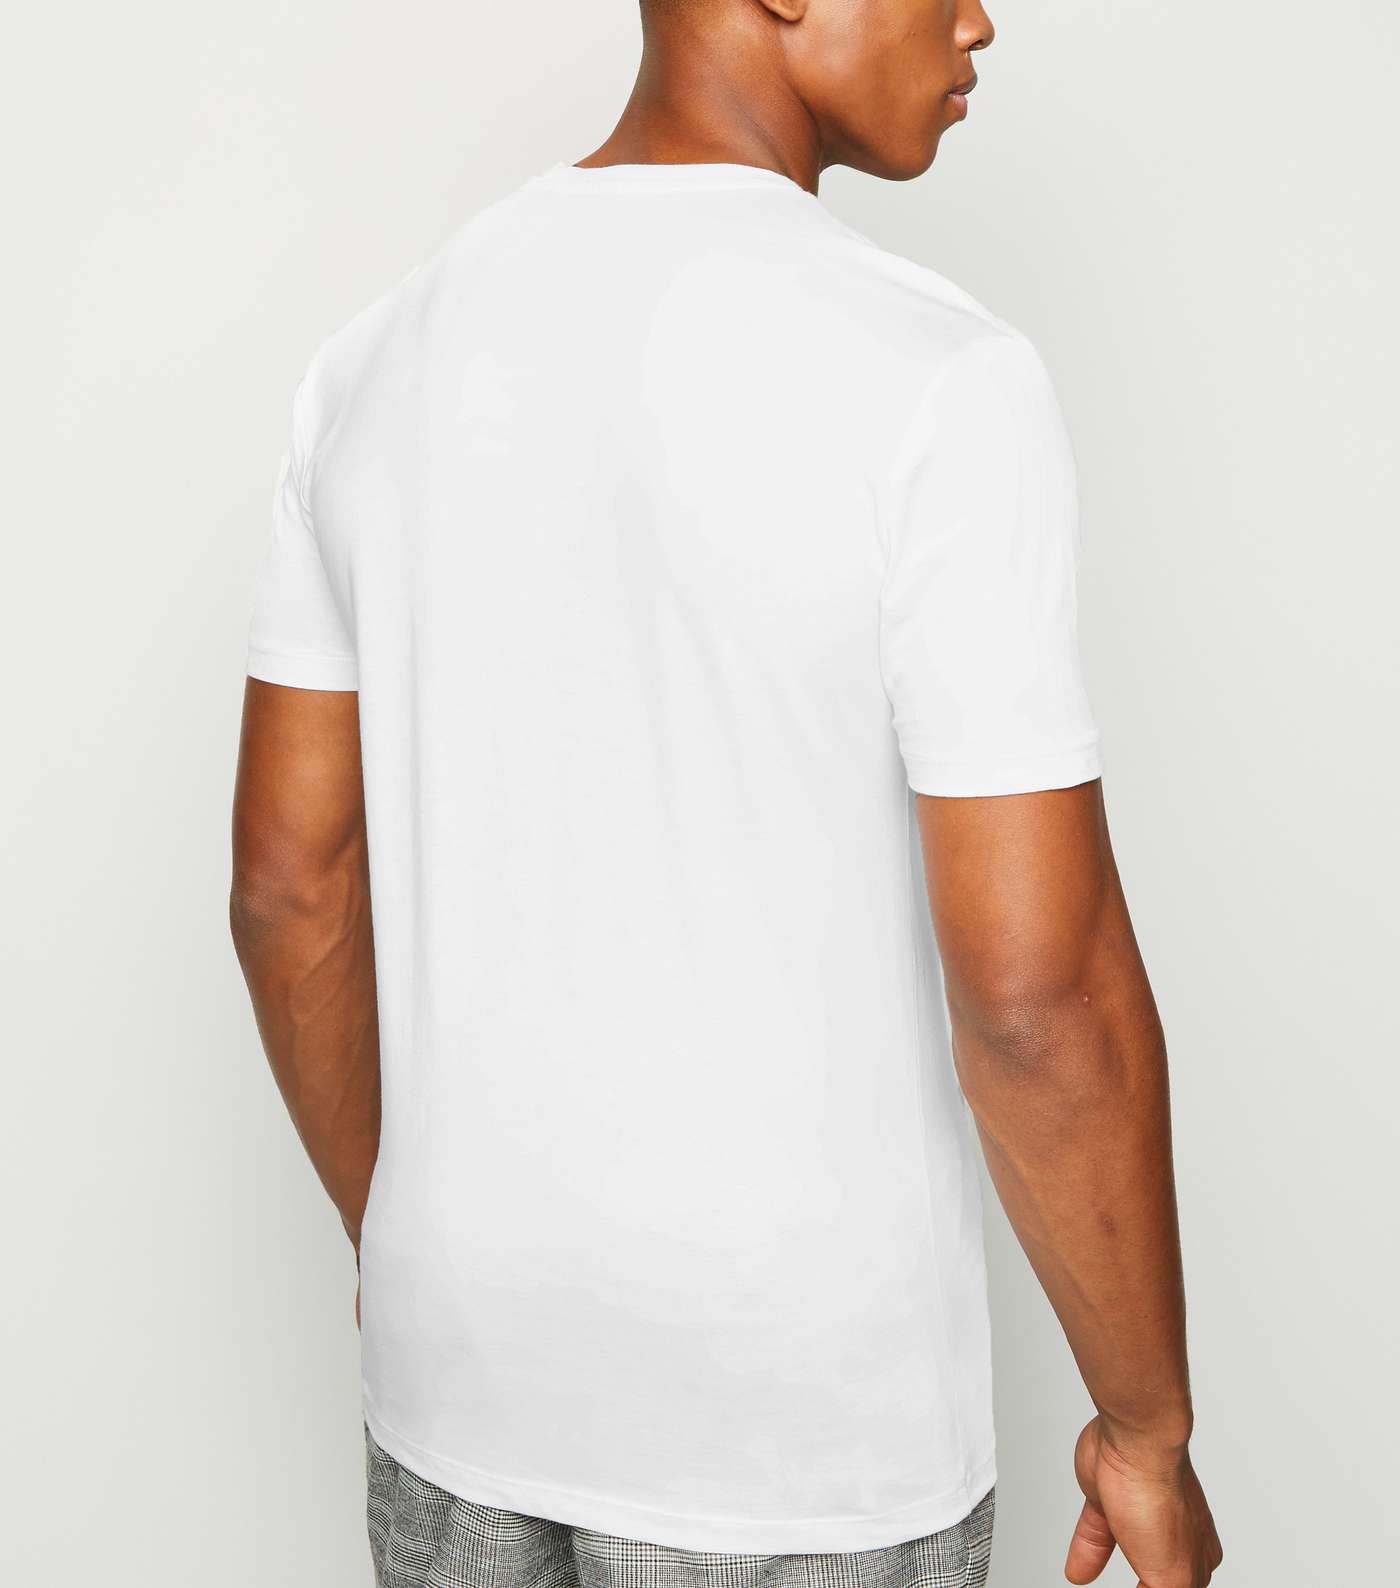 White Short Sleeve Muscle Fit T-Shirt Image 3